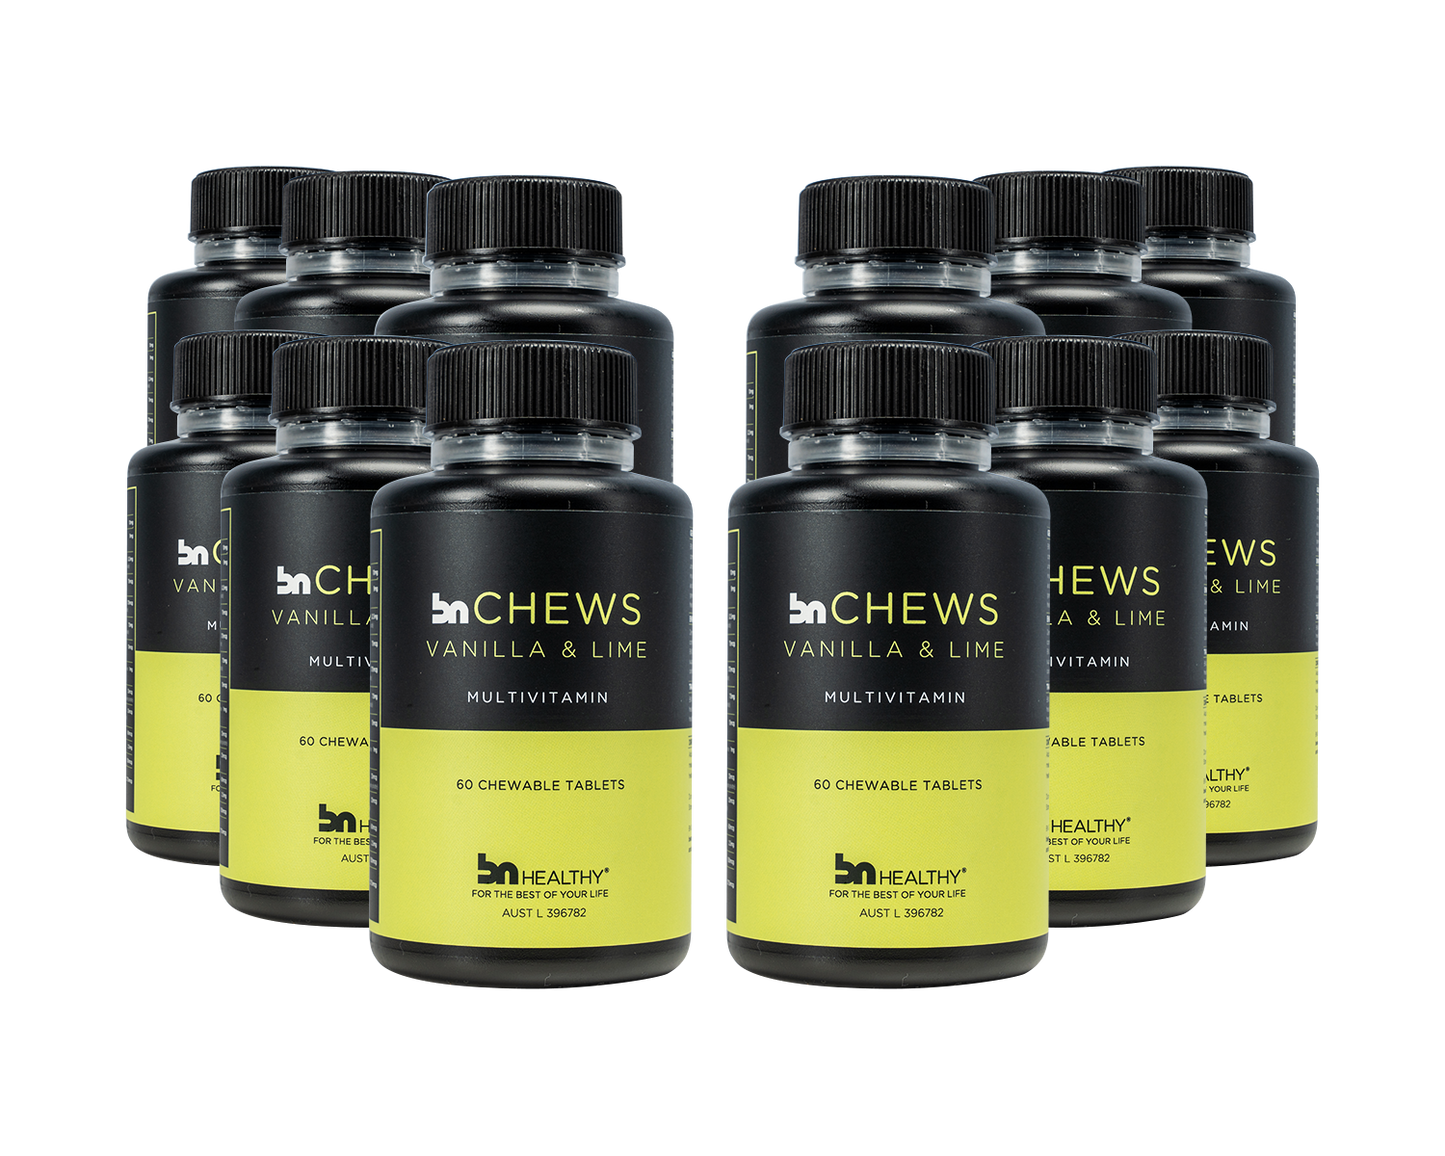 BN Chews Vanilla Lime - Chewable Multivitamins - 12 Month Subscription - Save 28%